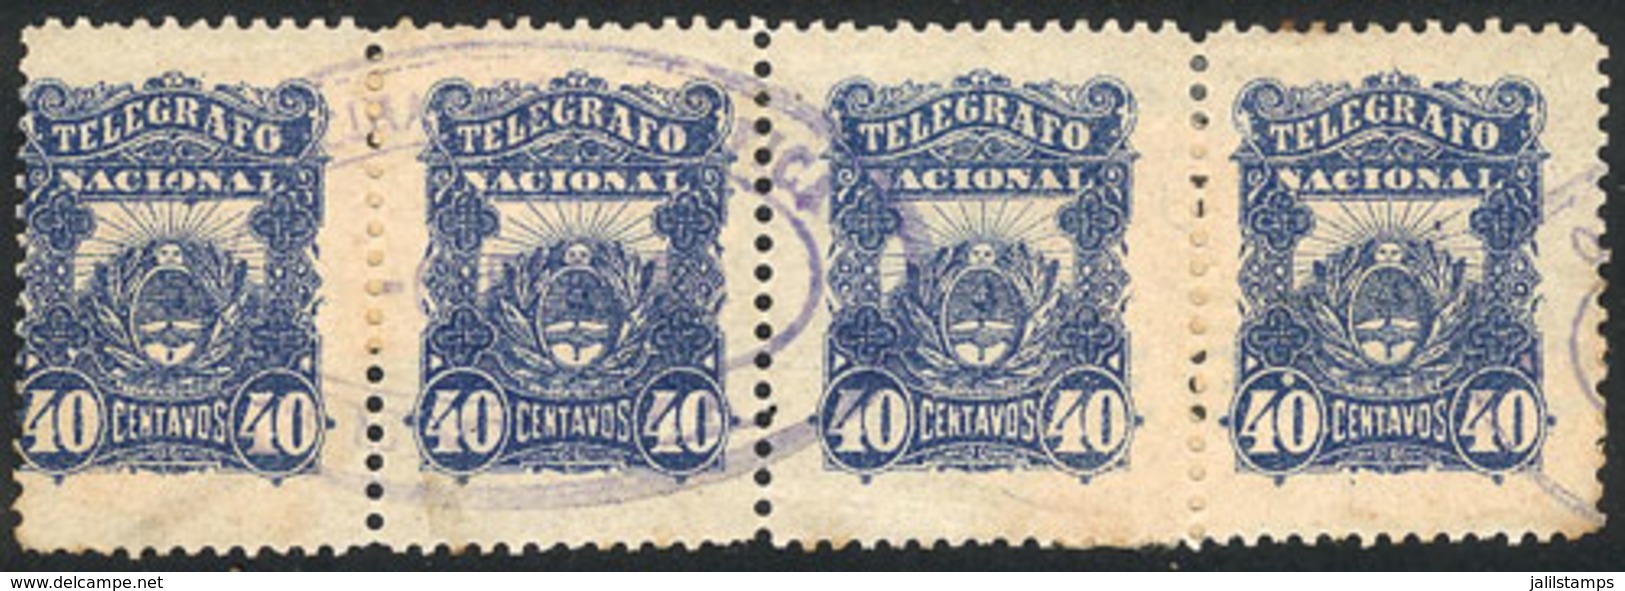 ARGENTINA: GJ.4, Beautiful Used Strip Of 4 Stamps, VF Quality, Rare Multiple! - Telegraph